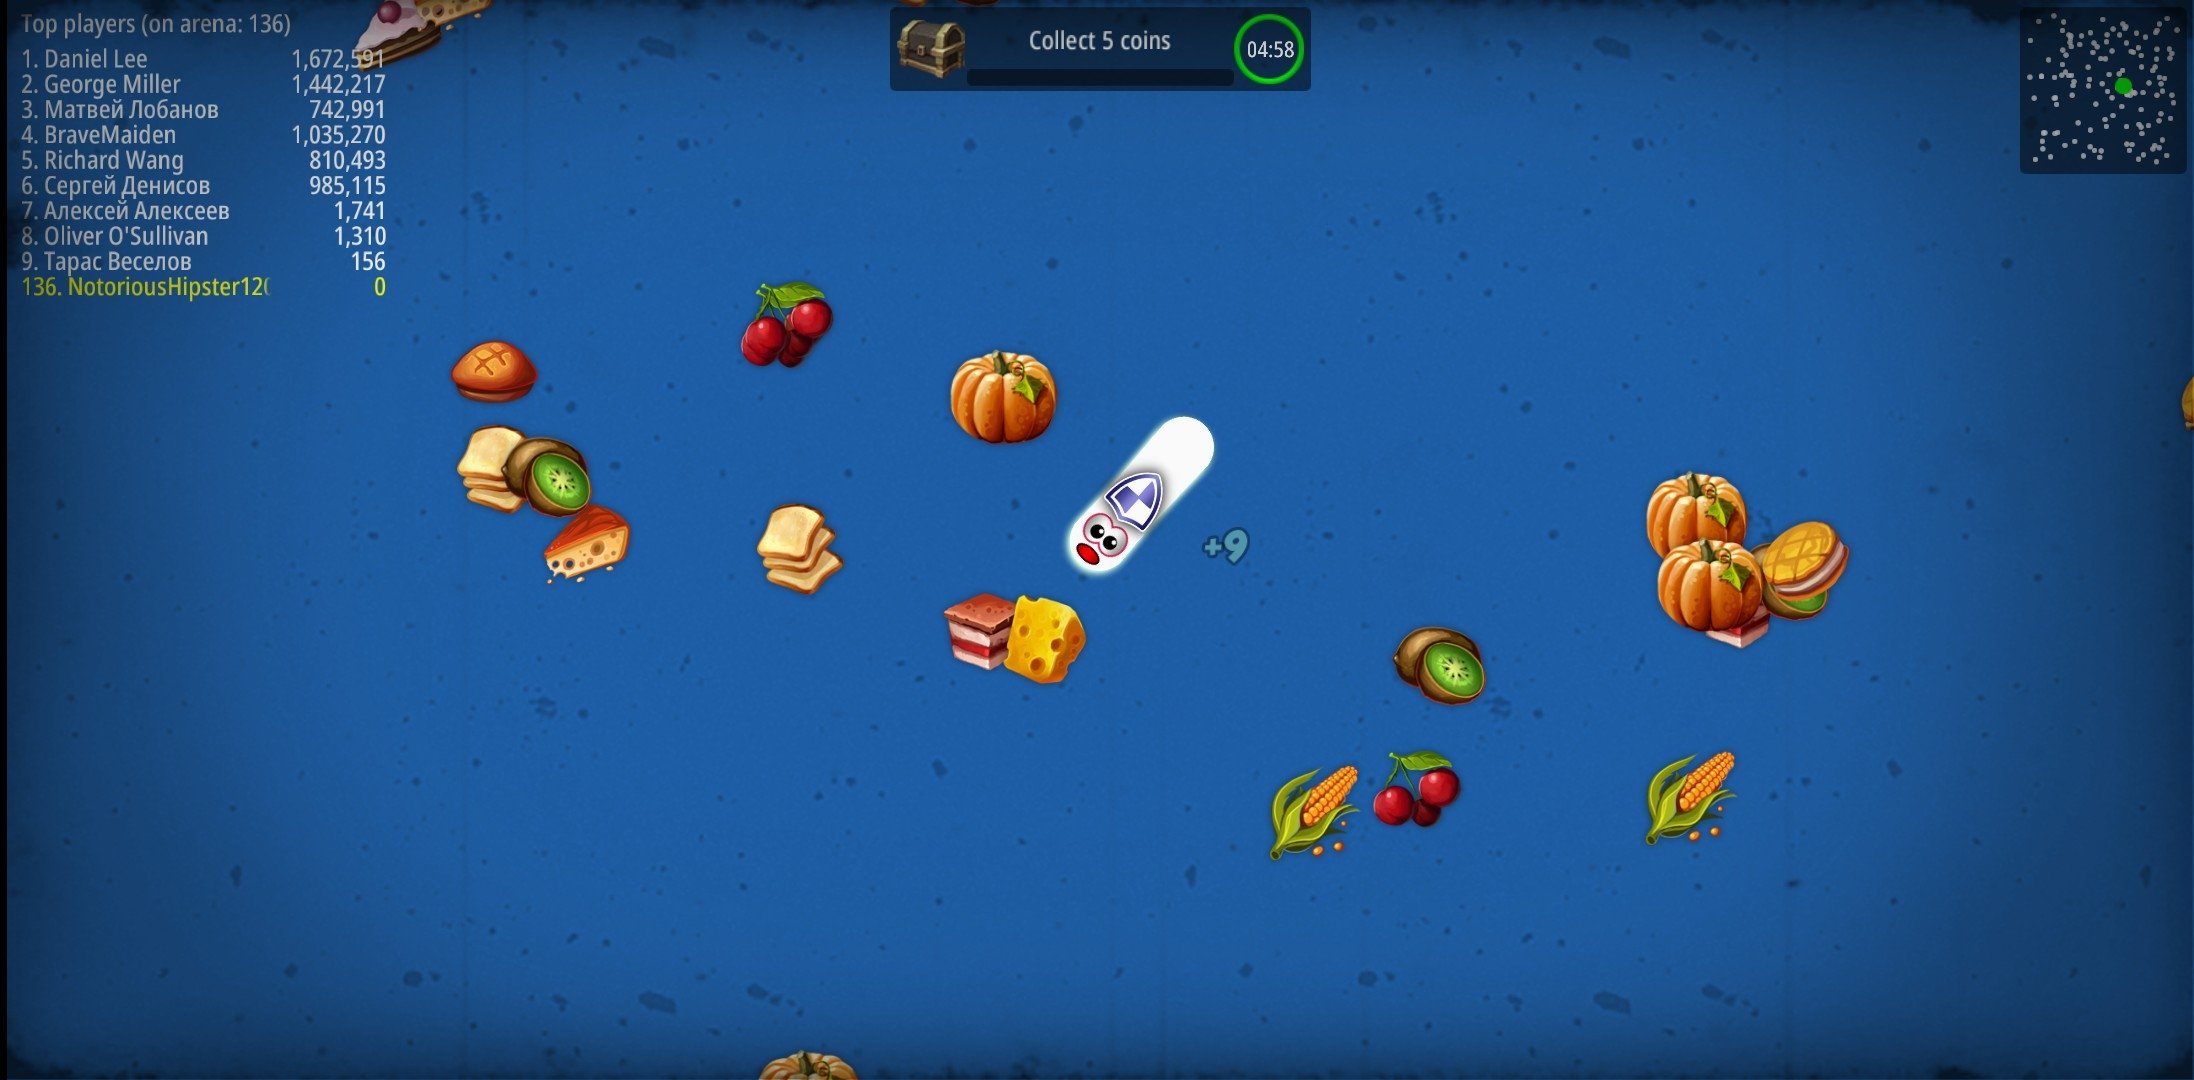 Download Zombs.io Zombie Battle io Game android on PC